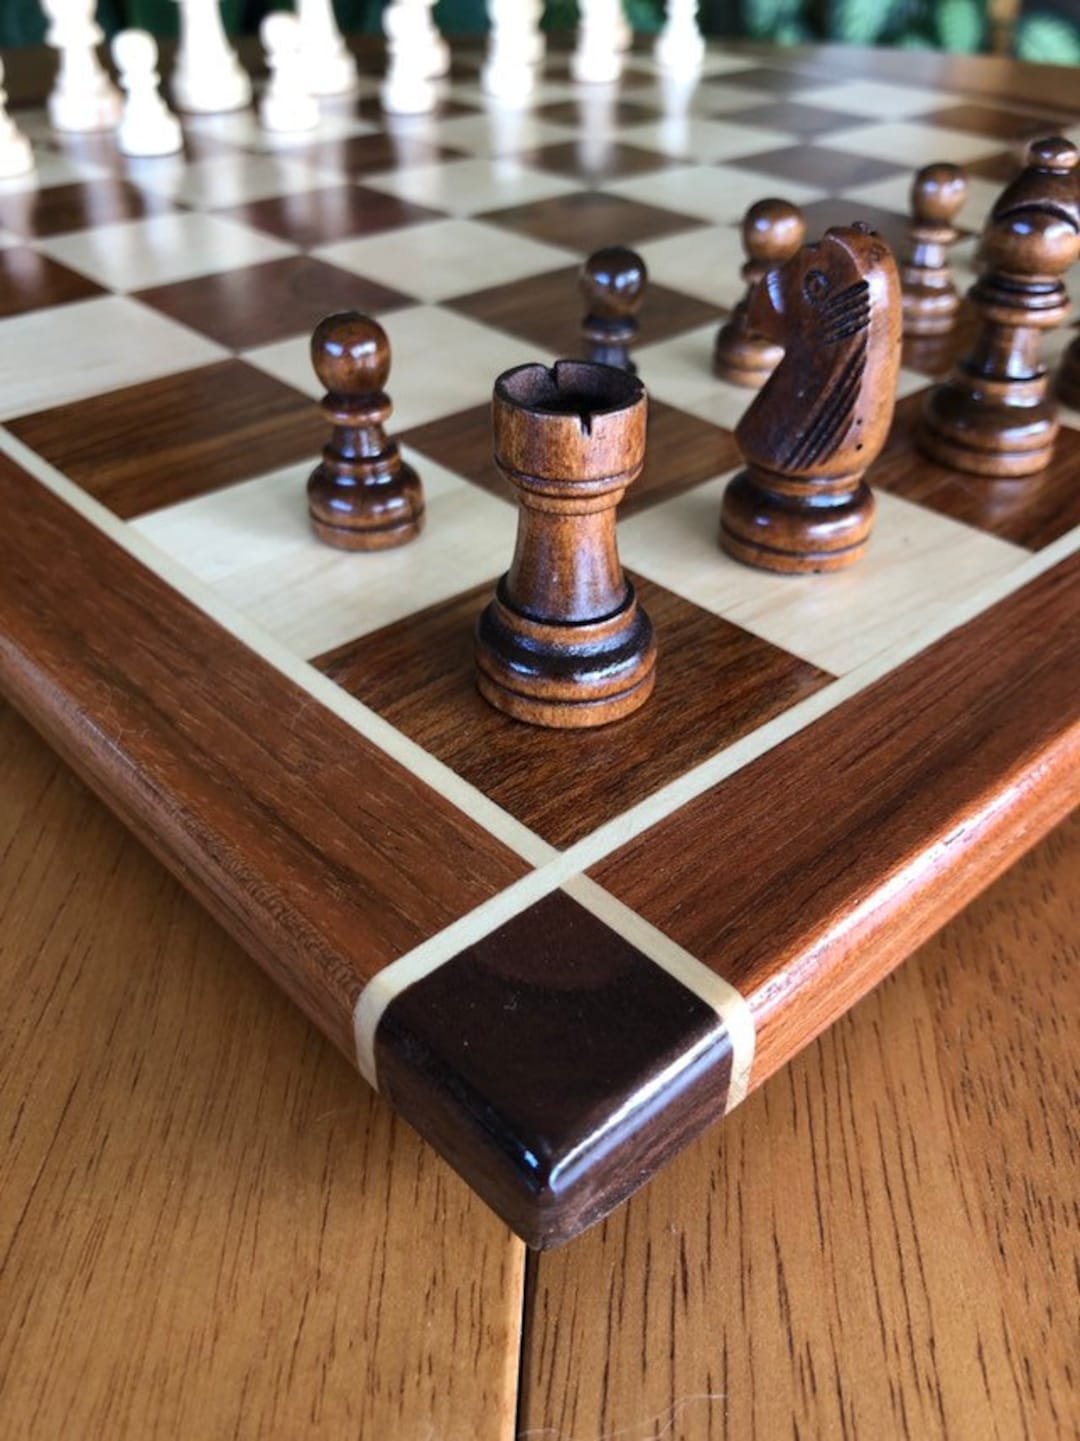 Better Than Chess: Reviews, Features, Pricing & Download